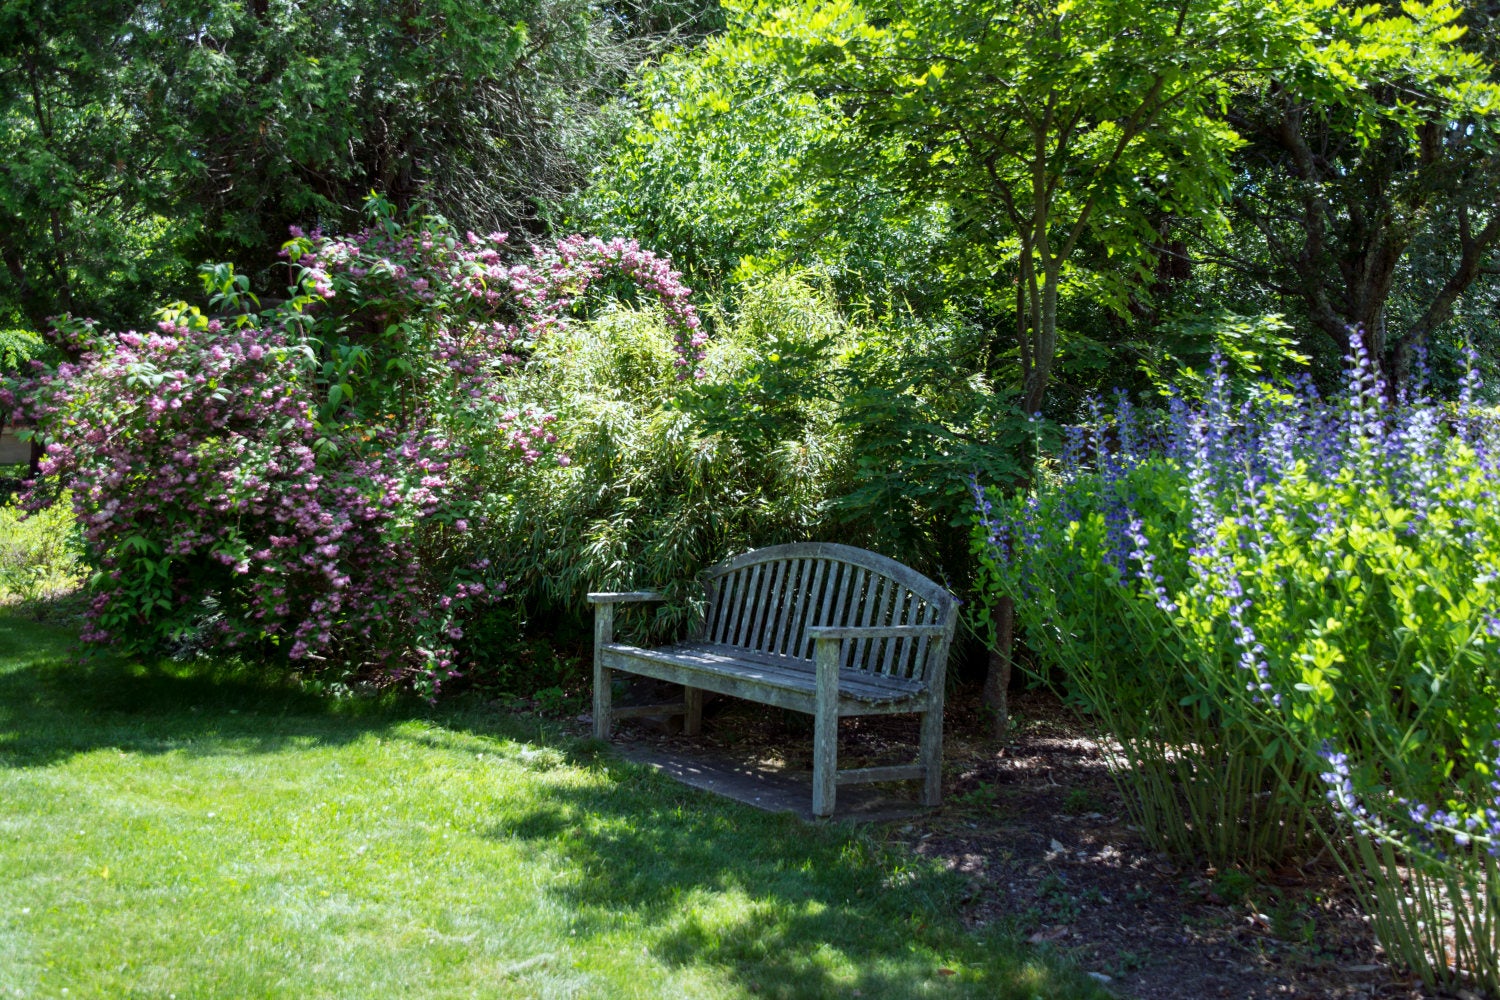 A wooden bench in the URI botanical garden, surrounded by flowering shrubs